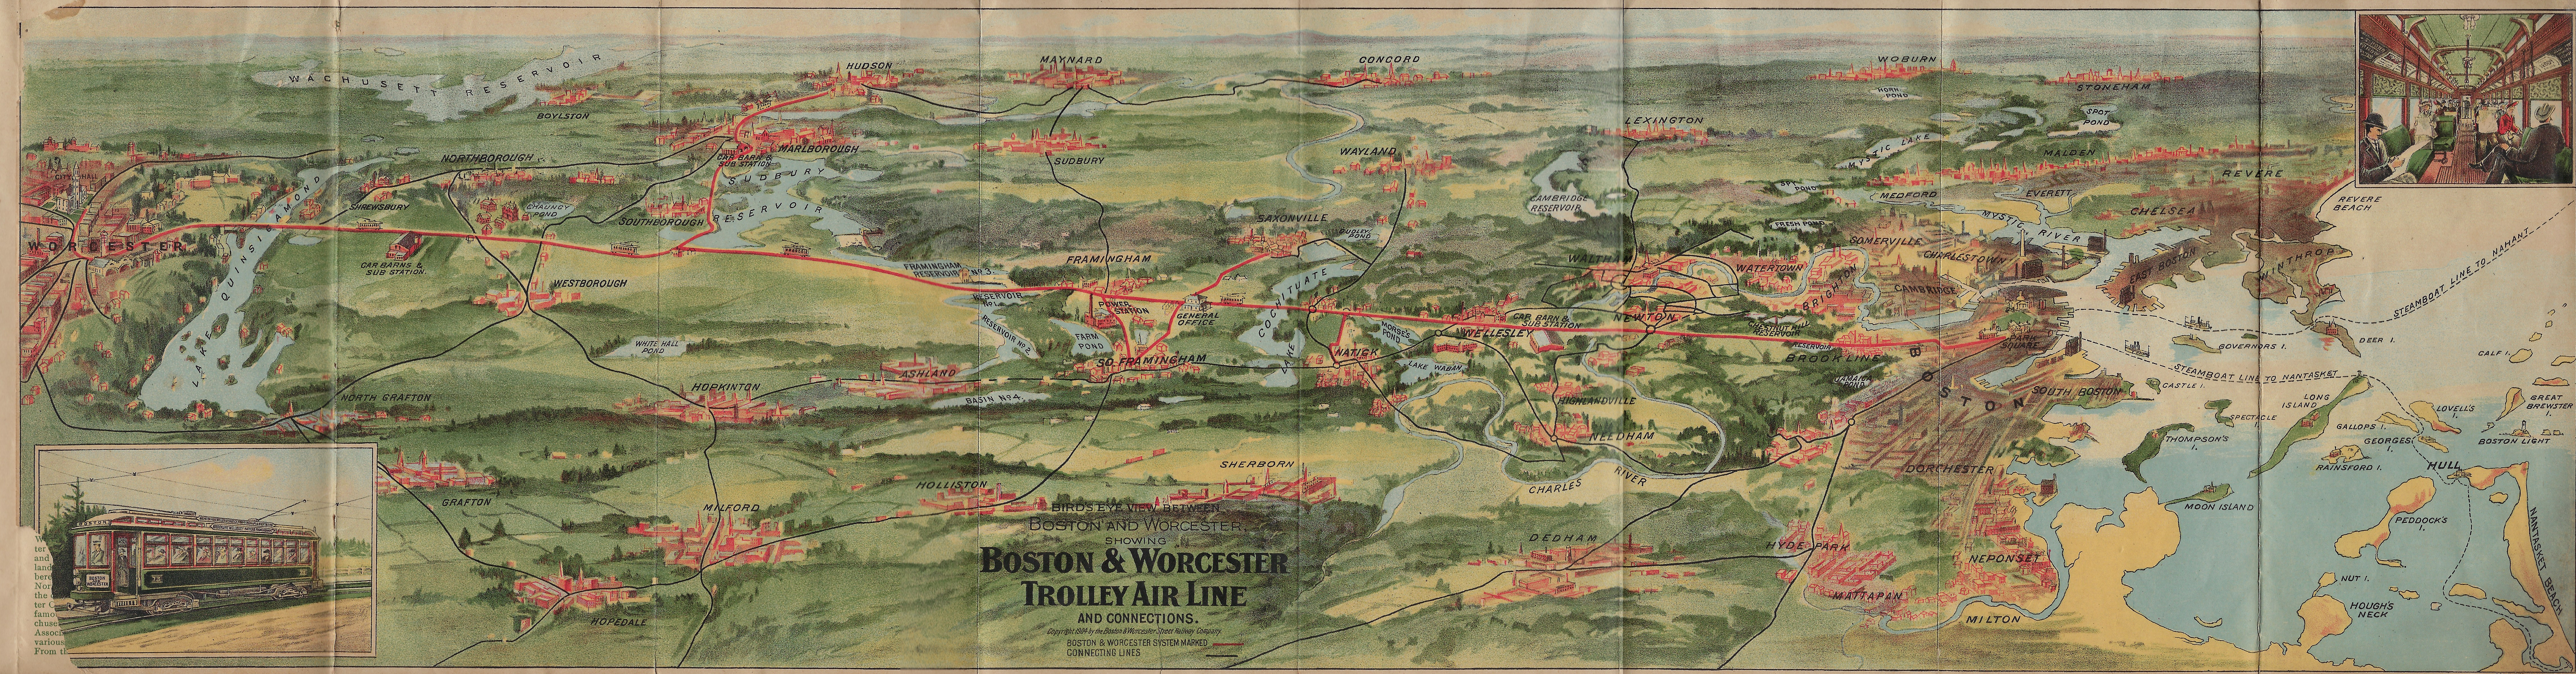 Early 1900's Map of the Boston Worcester Air Line from Brochure